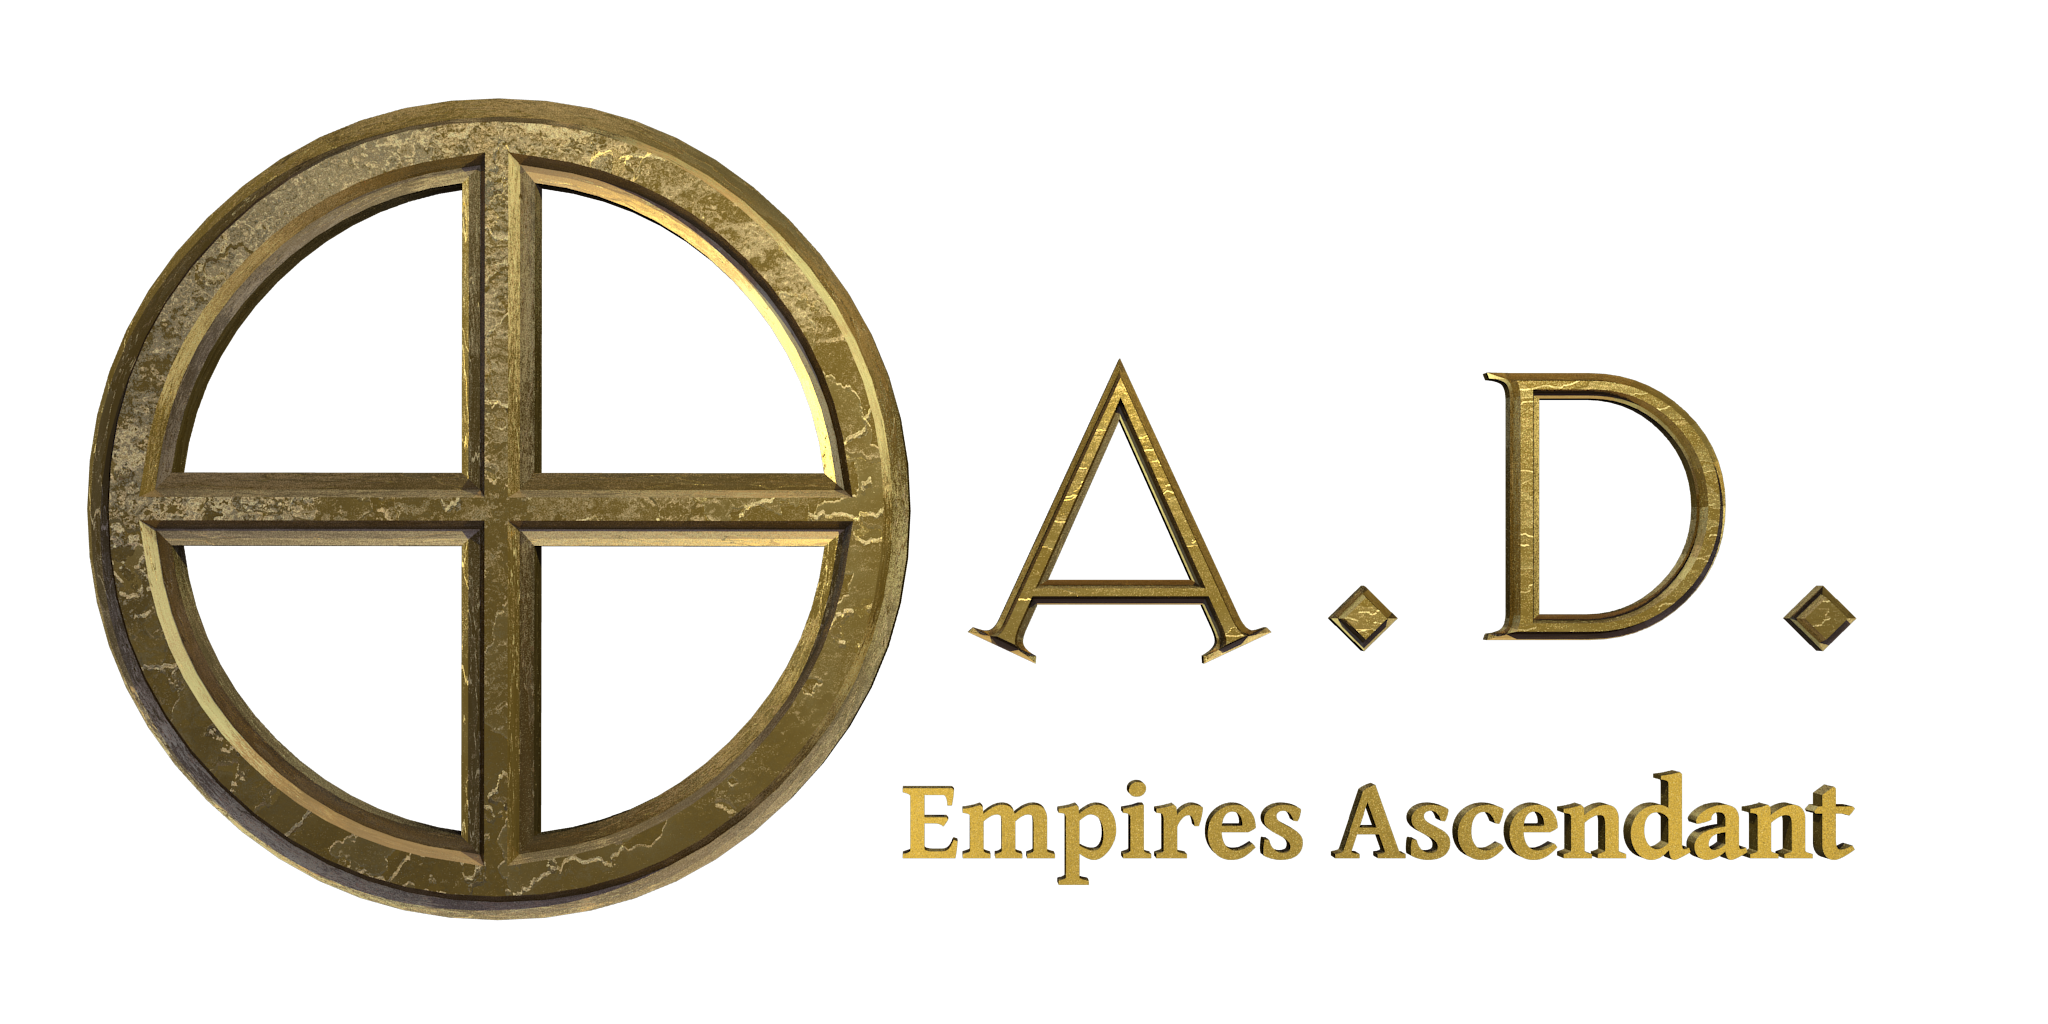 0 A.D. | A free, open-source game of ancient warfare